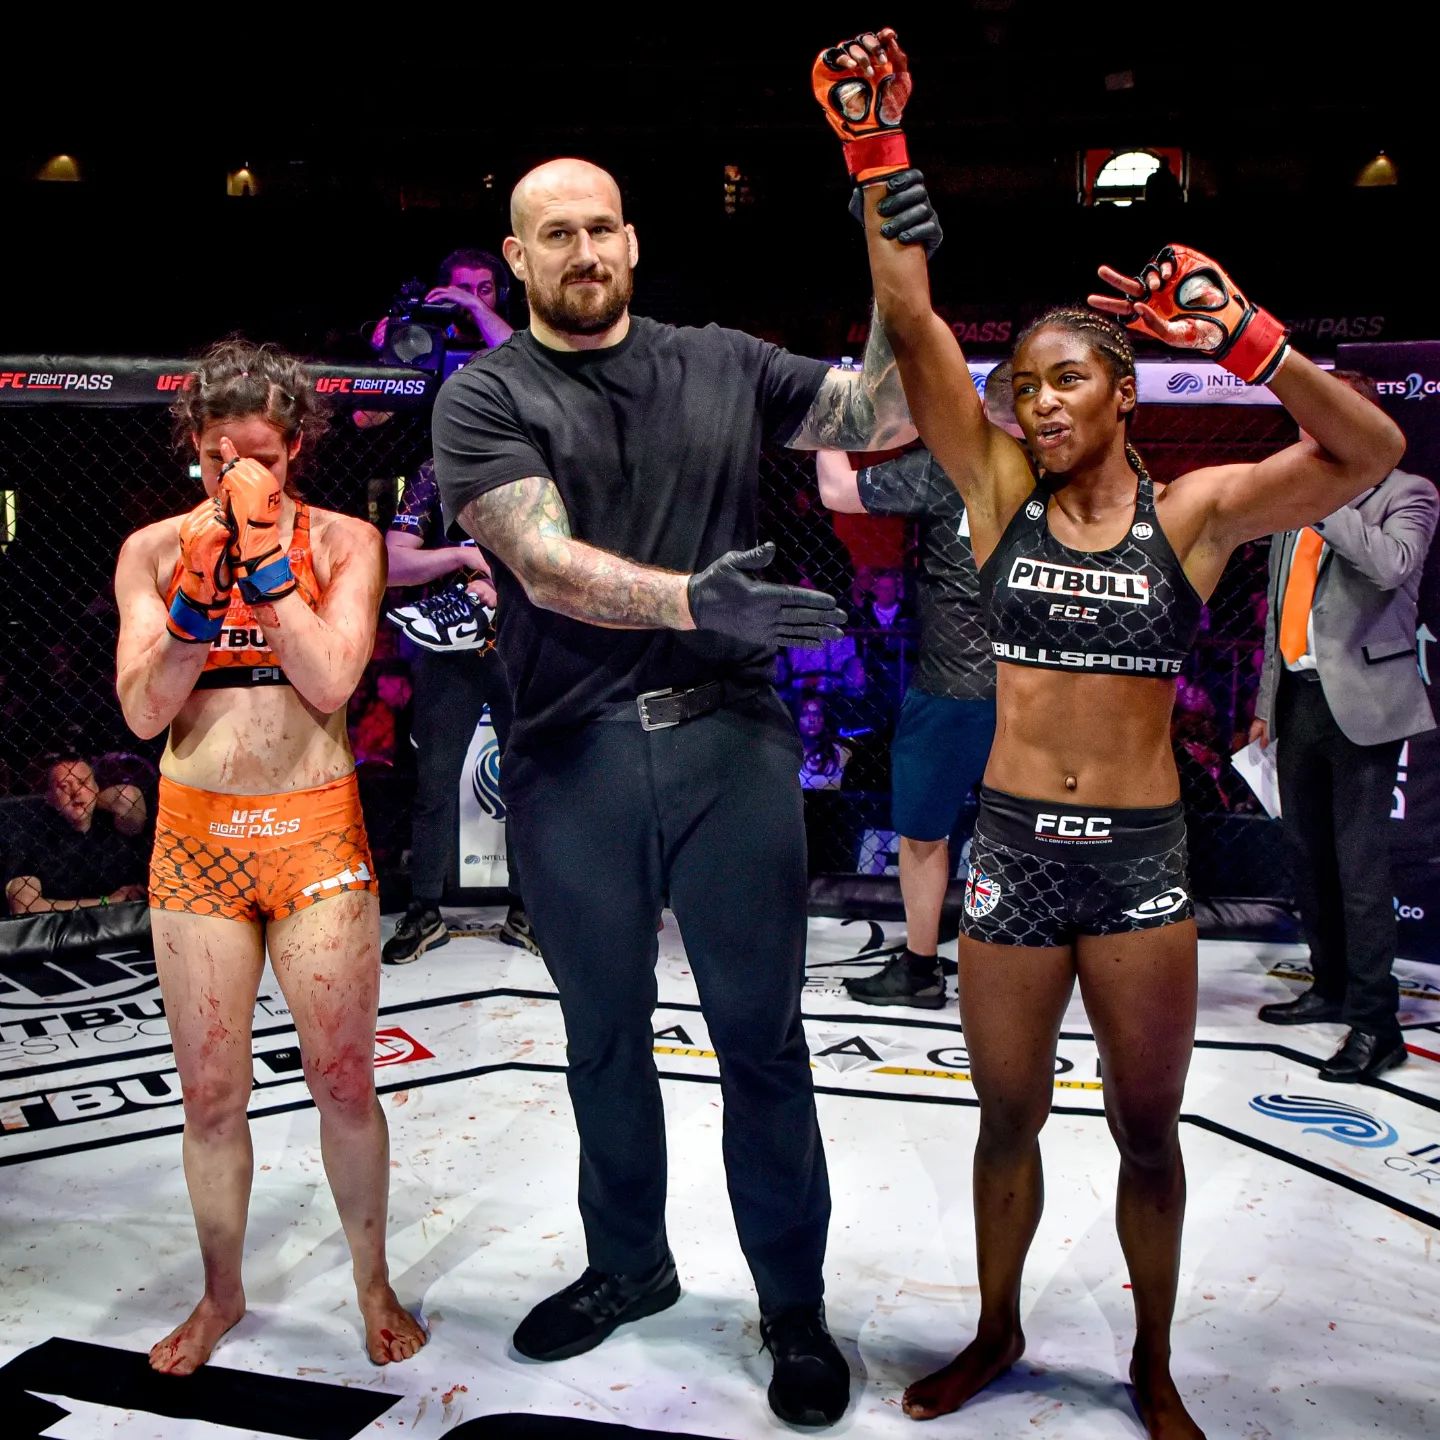 Shanelle Dyer Victorious at FCC MMA with Stunning First Round Finish!